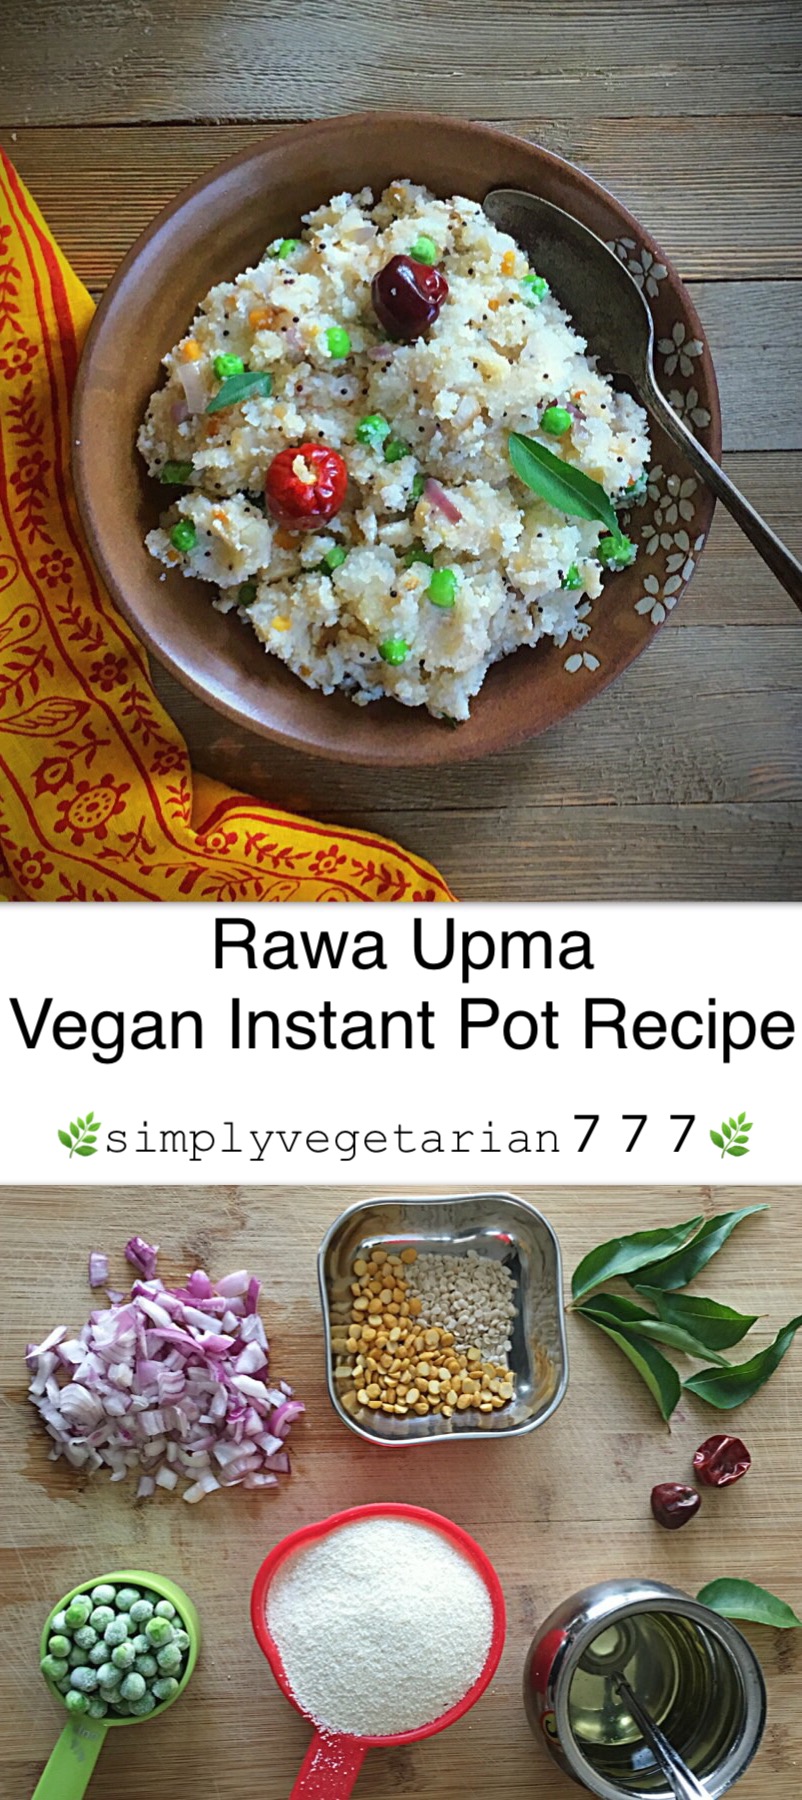 Rawa Upma Instant Pot Recipe is such an easy breezy recipe that is flavorful and done in no time. It is a popular breakfast and snack recipe from India. You can pack it for lunch boxes as well. The best part is that it is completely VEGAN RAWA UPMA RECIPE. #instantpotindianrecipes #instantpotvegan #rawaupma #upma #semolinarecipes #semolinavegatarianrecipes